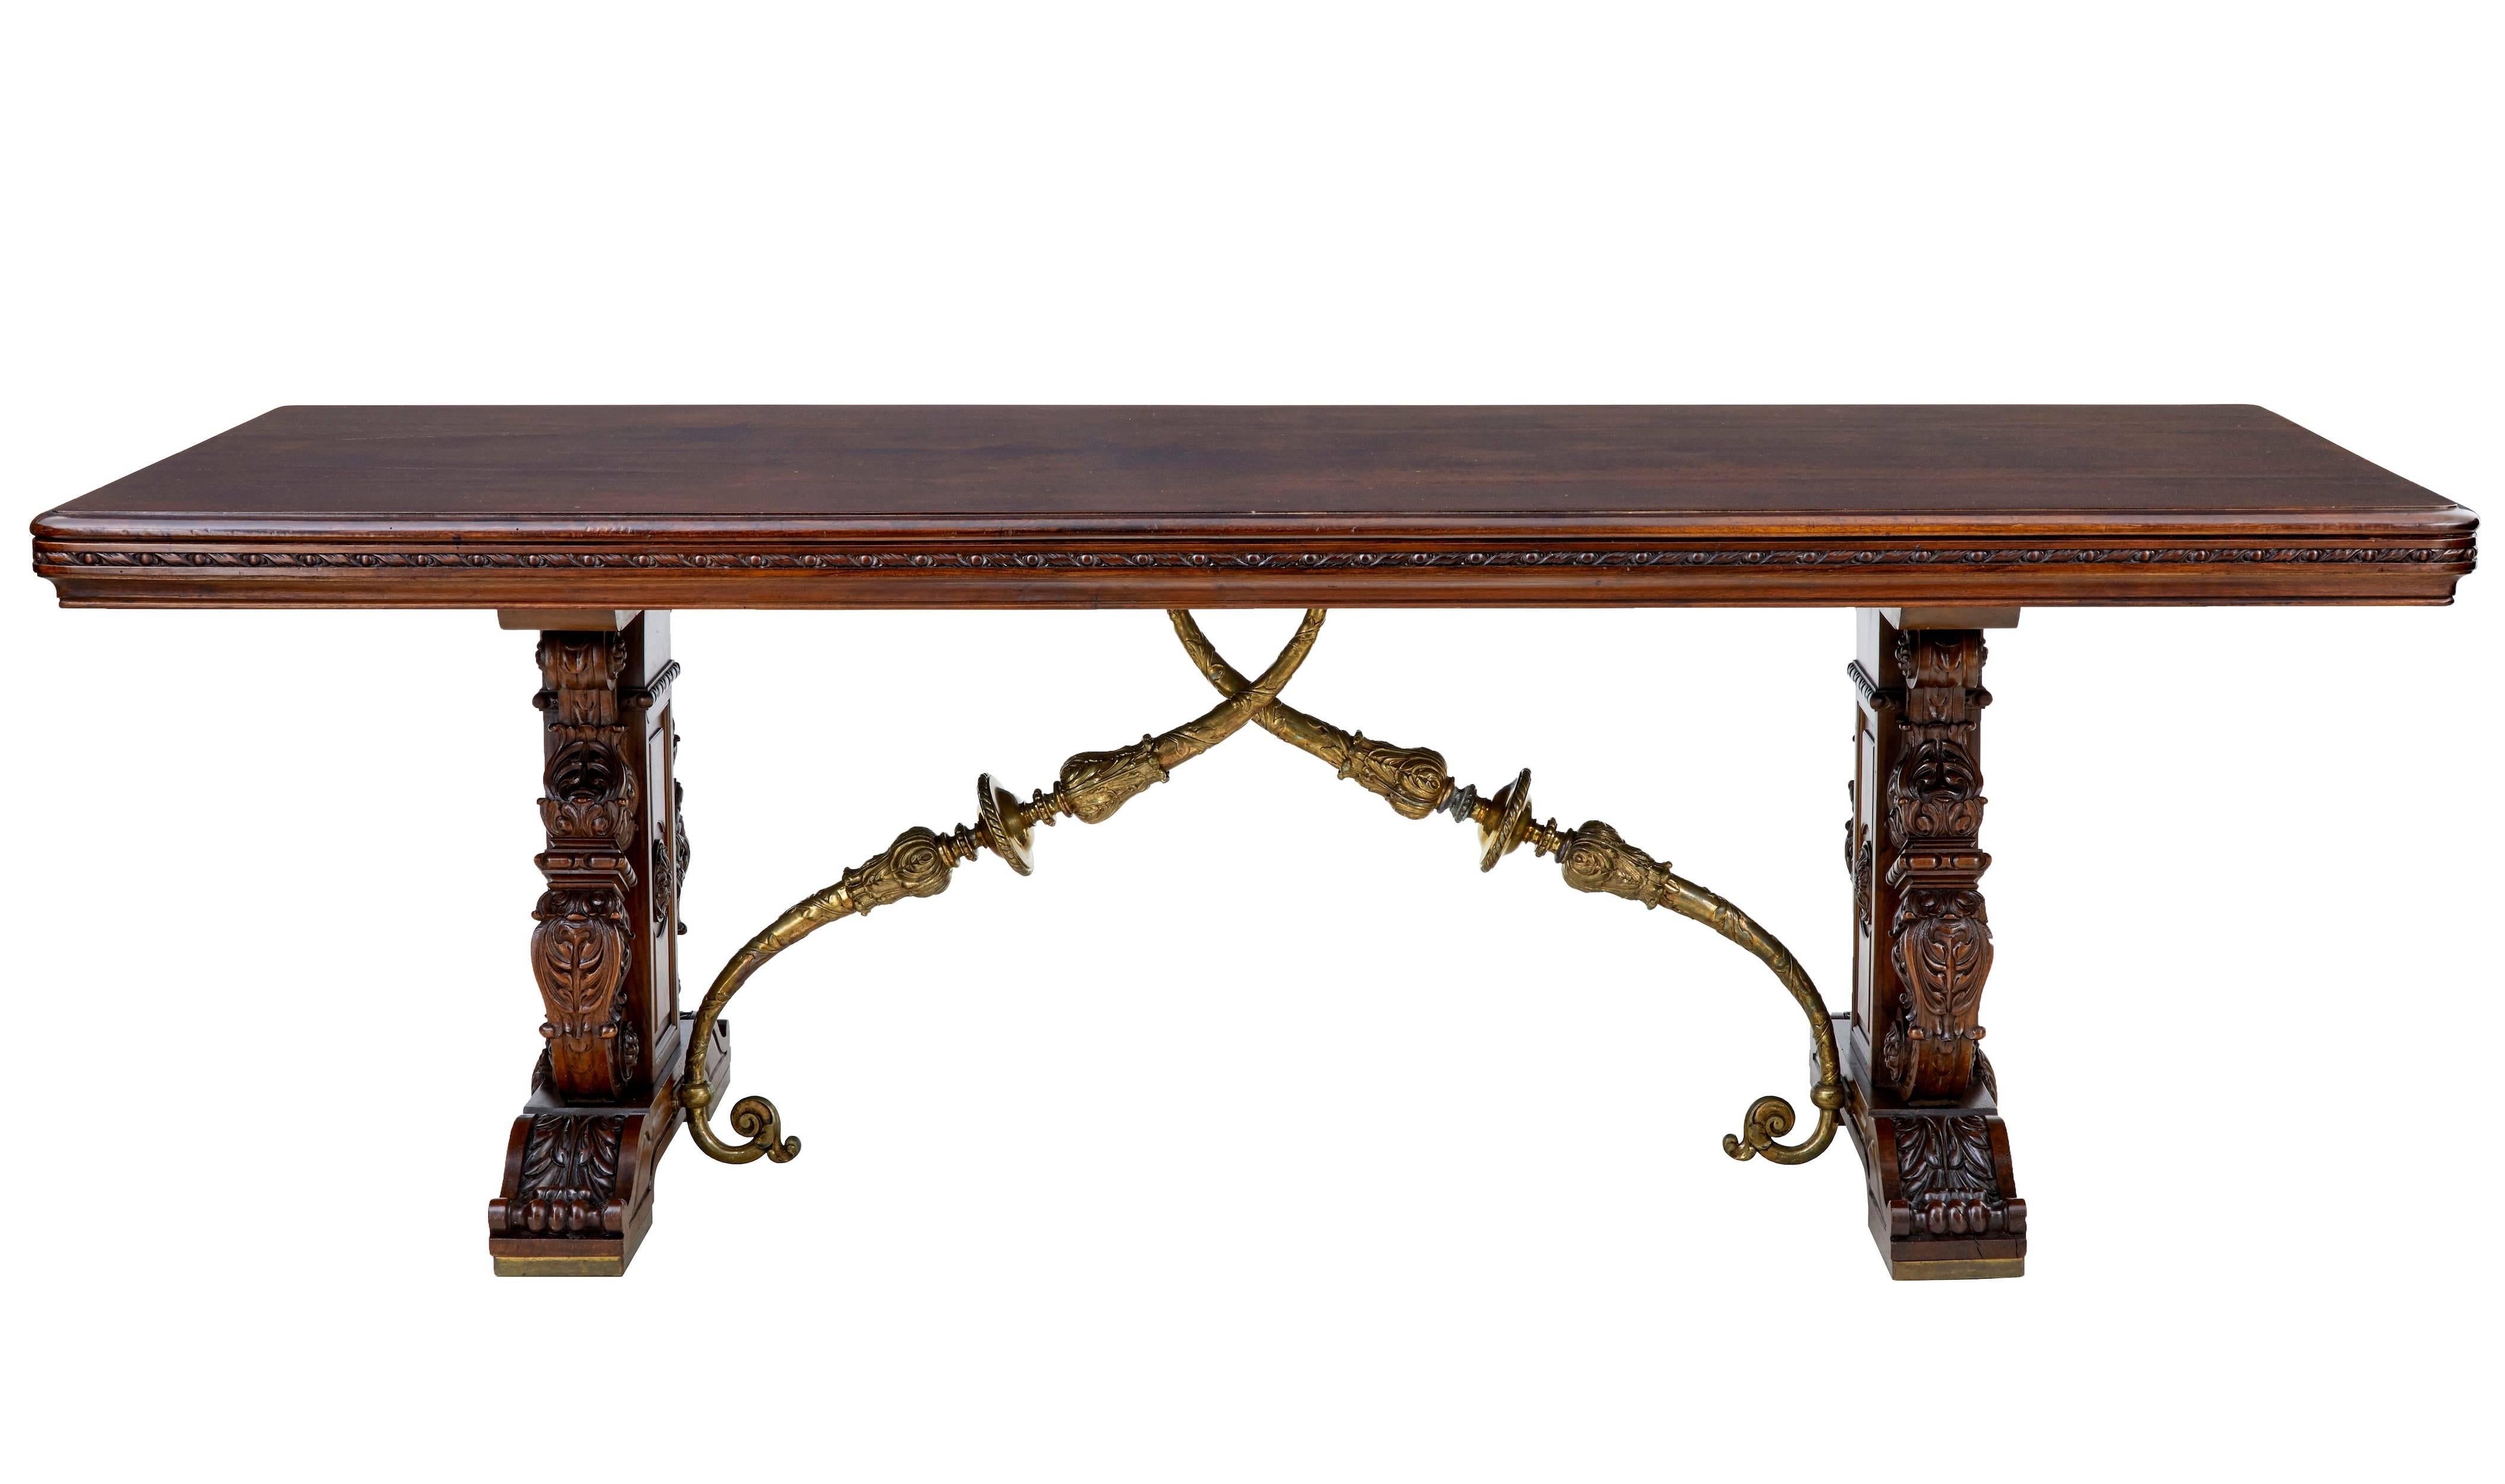 Stunning French walnut dining table, circa 1880.
Rare table, made to showcase continental table design. Italian inspired carved trestle ends with scrolling supports and applied shells. The table gains its Spanish influenced from the bronze cross